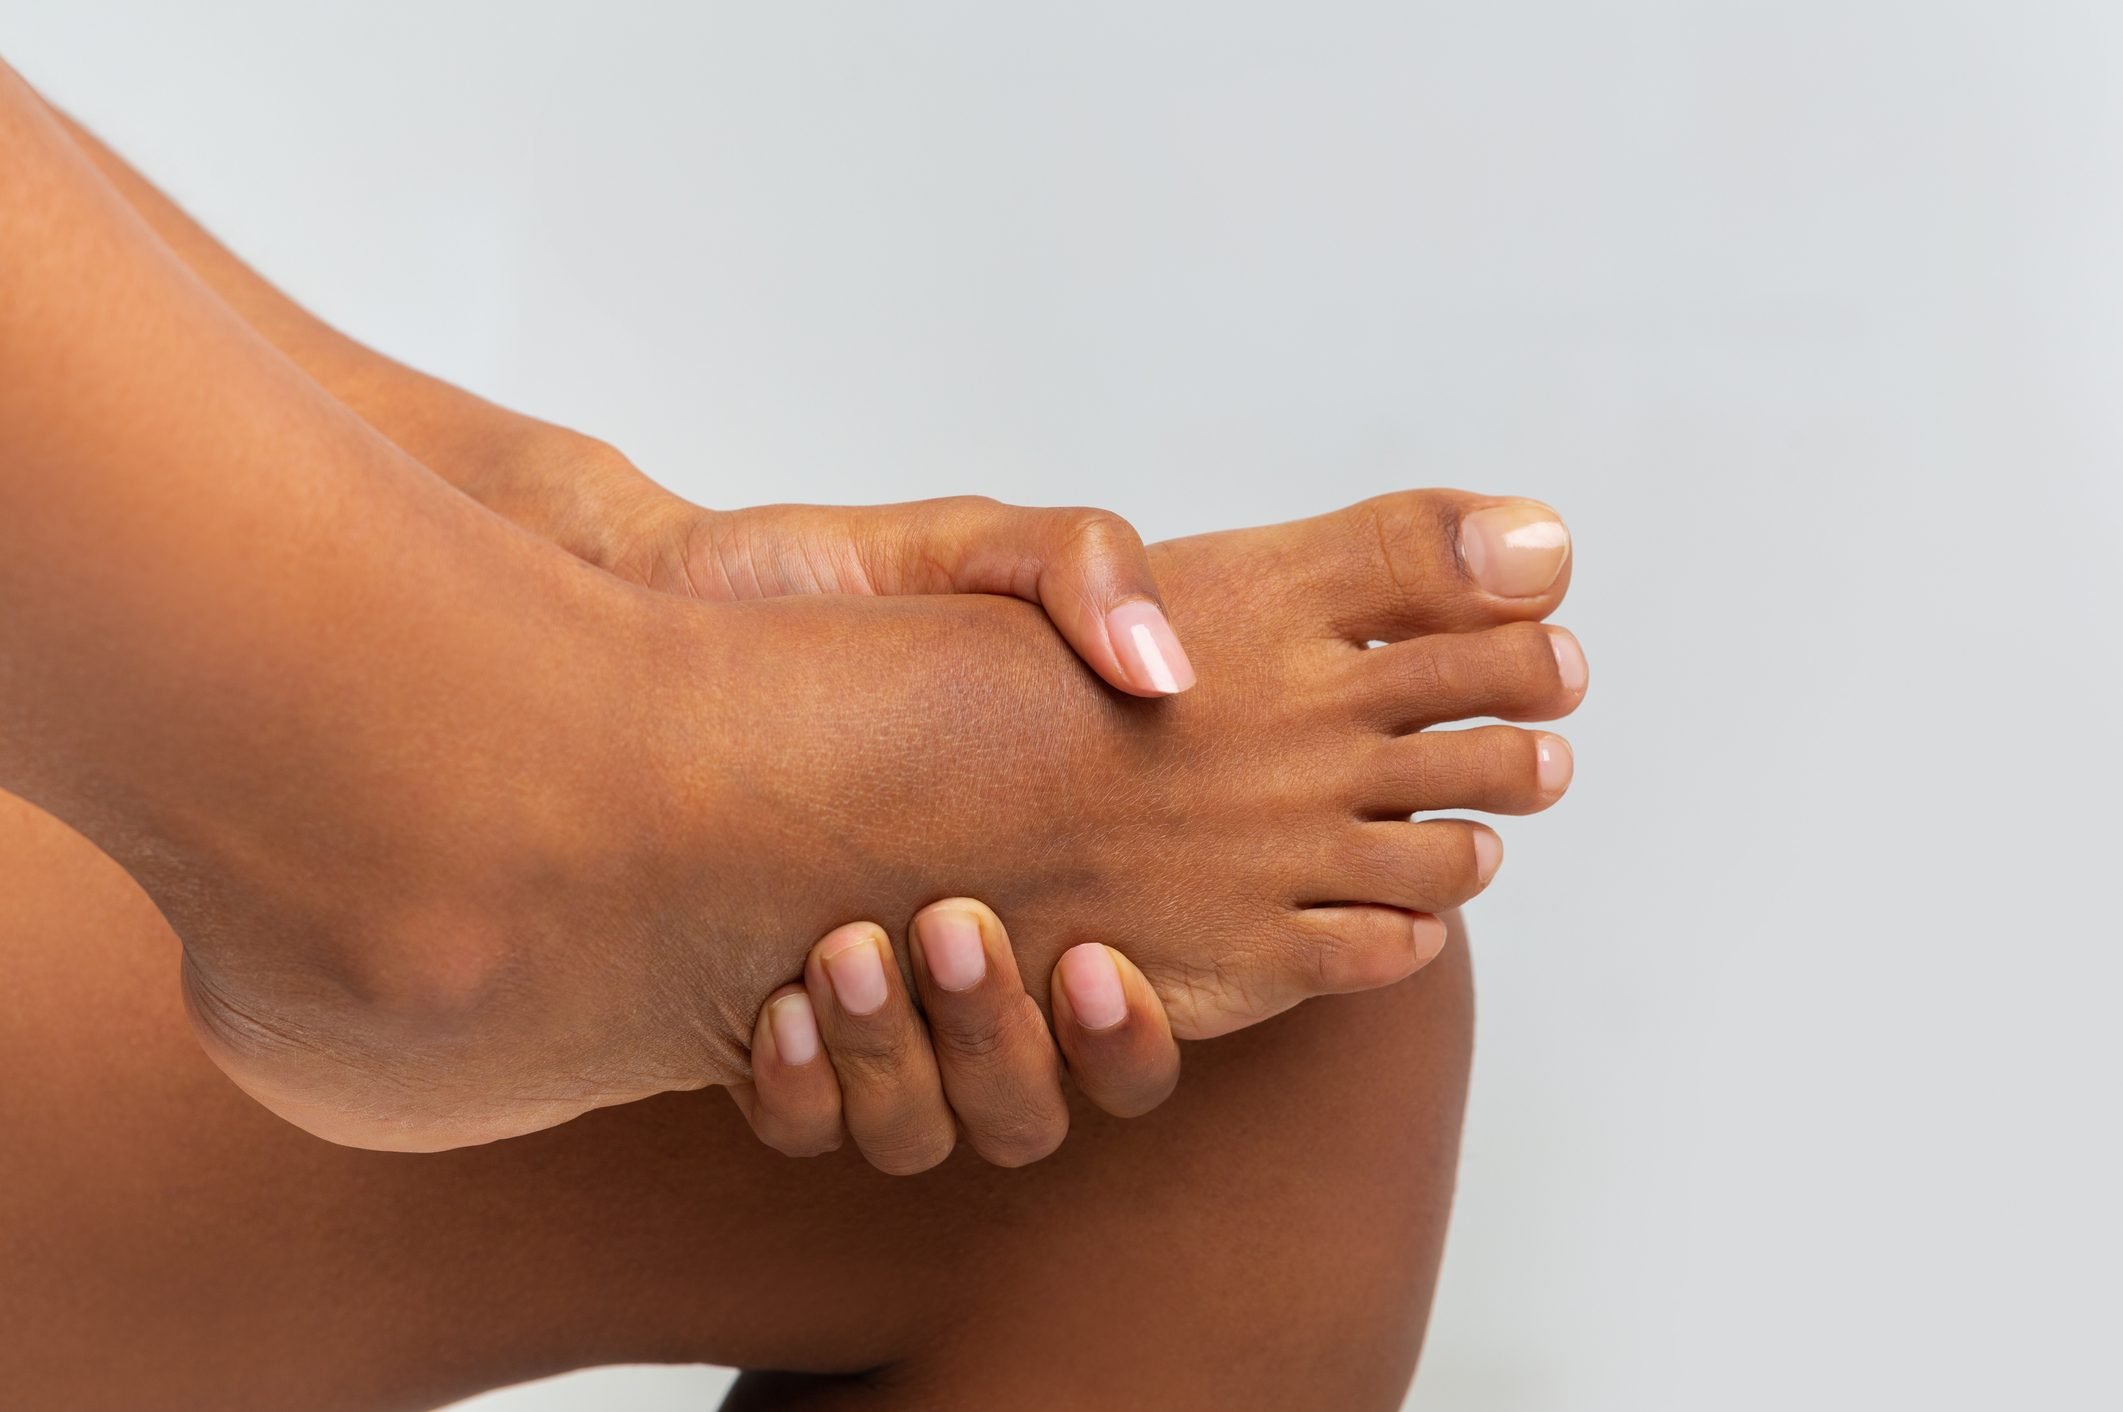 Pain on of Your Foot: Causes, Symptoms, and Treatment | The Healthy